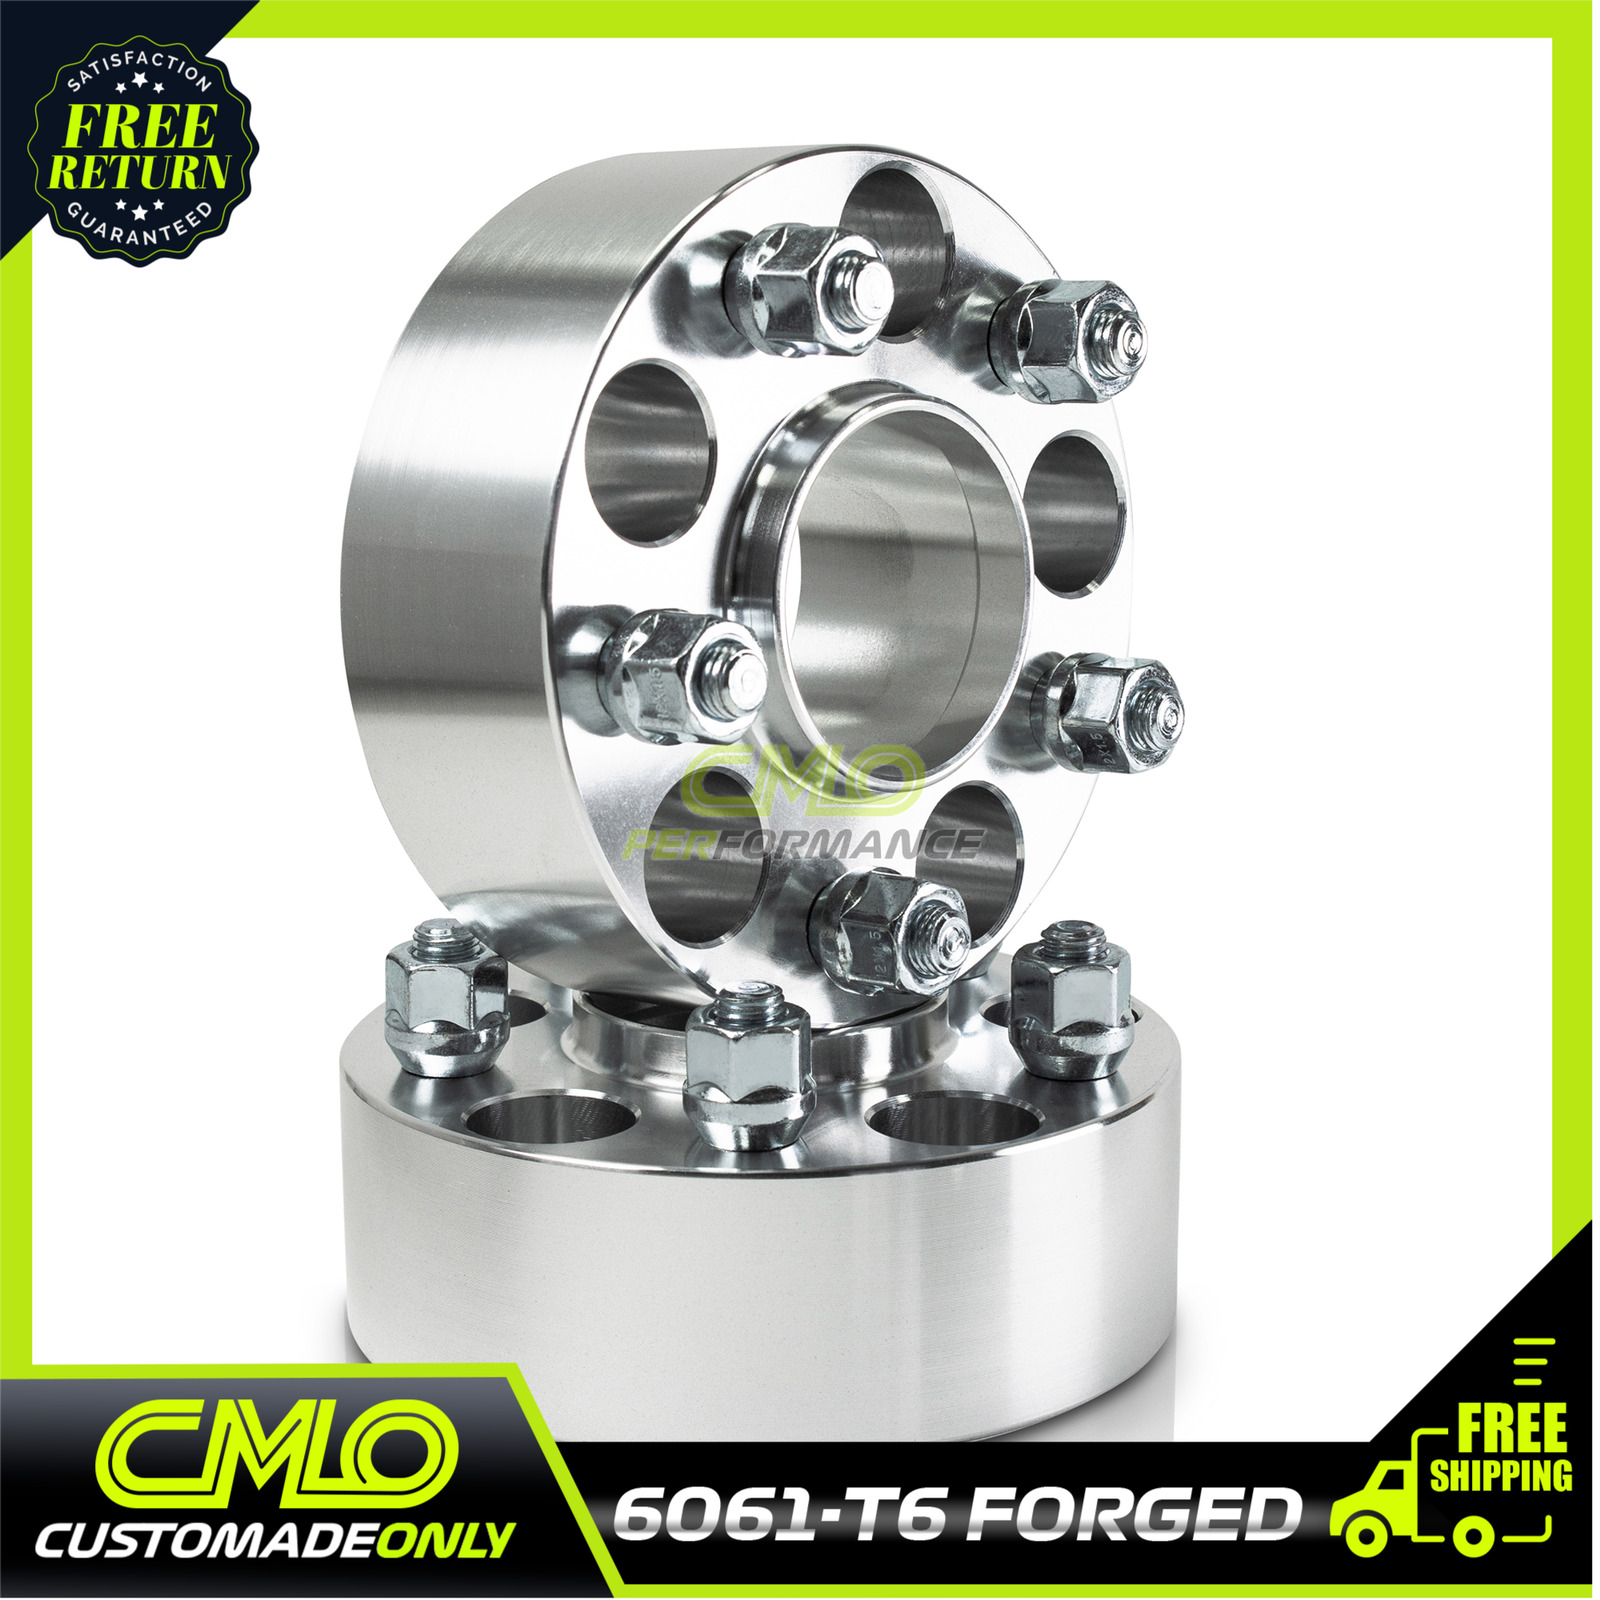 2pc 50mm Hubcentric Wheel Spacers 5x4.5 Fits IS250 IS300 IS350 GS350 GS460 Camry